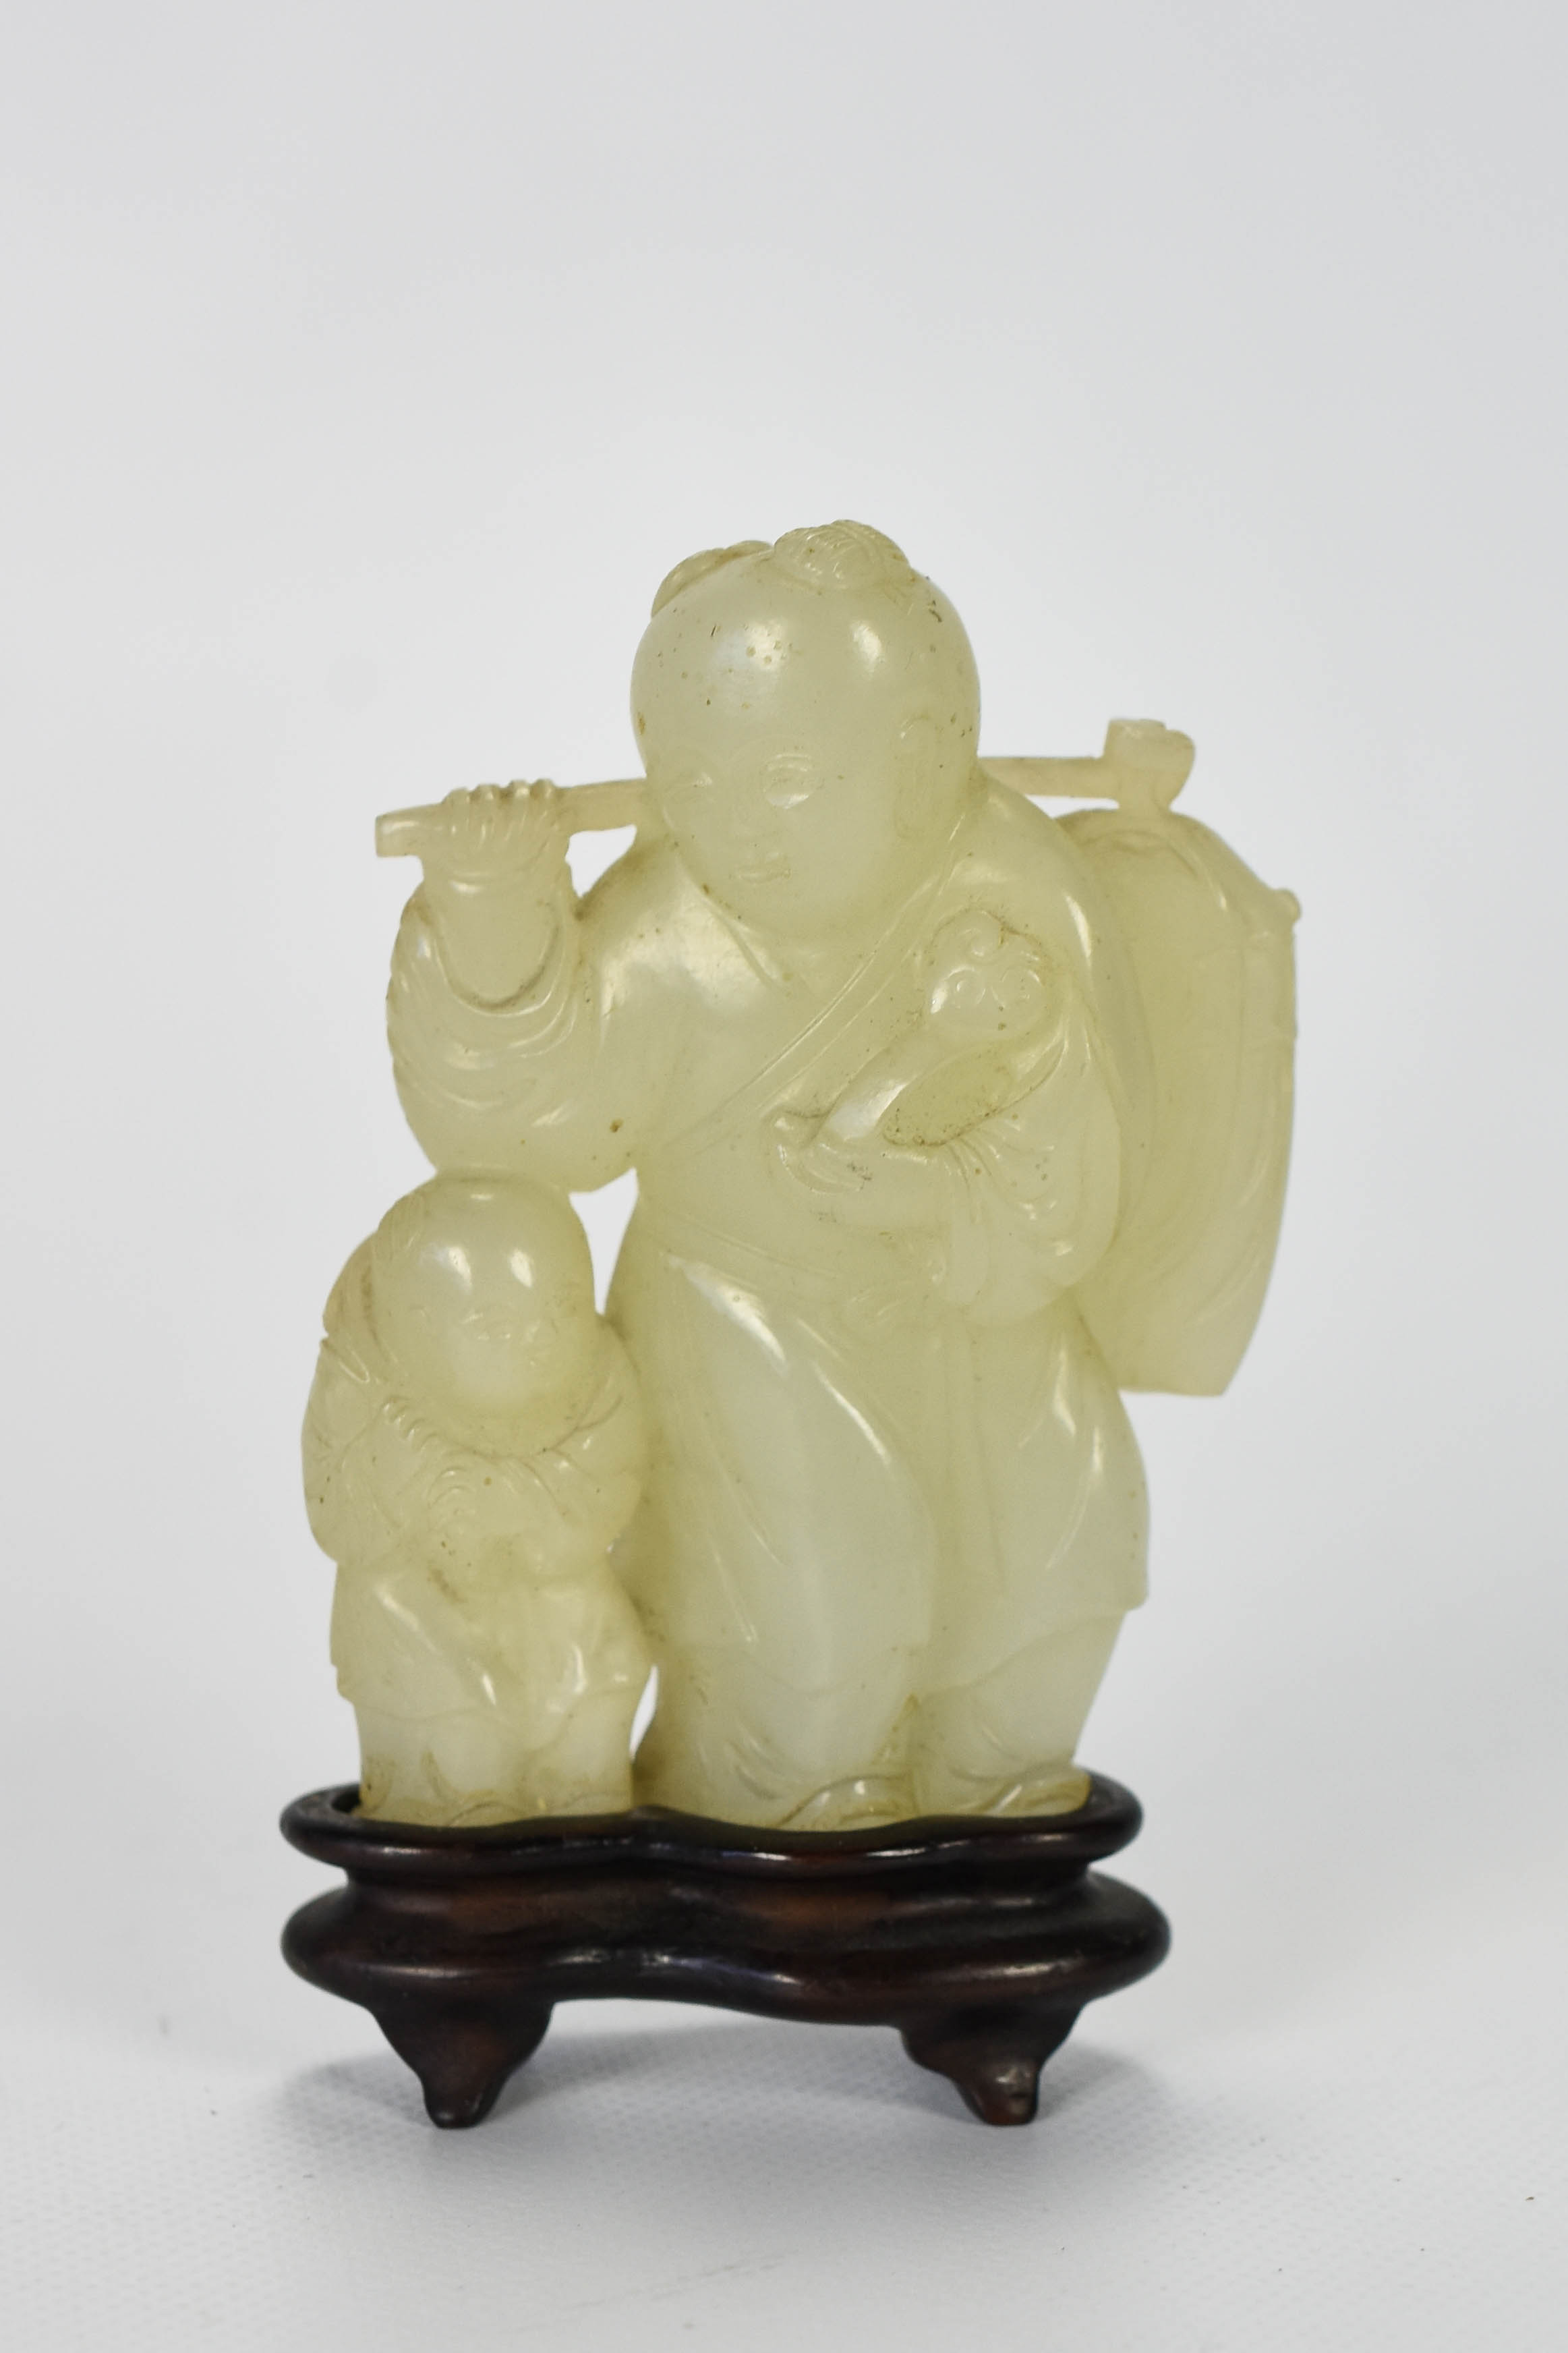 Antique Chinese Carved Mutton Fat Jade Figurine